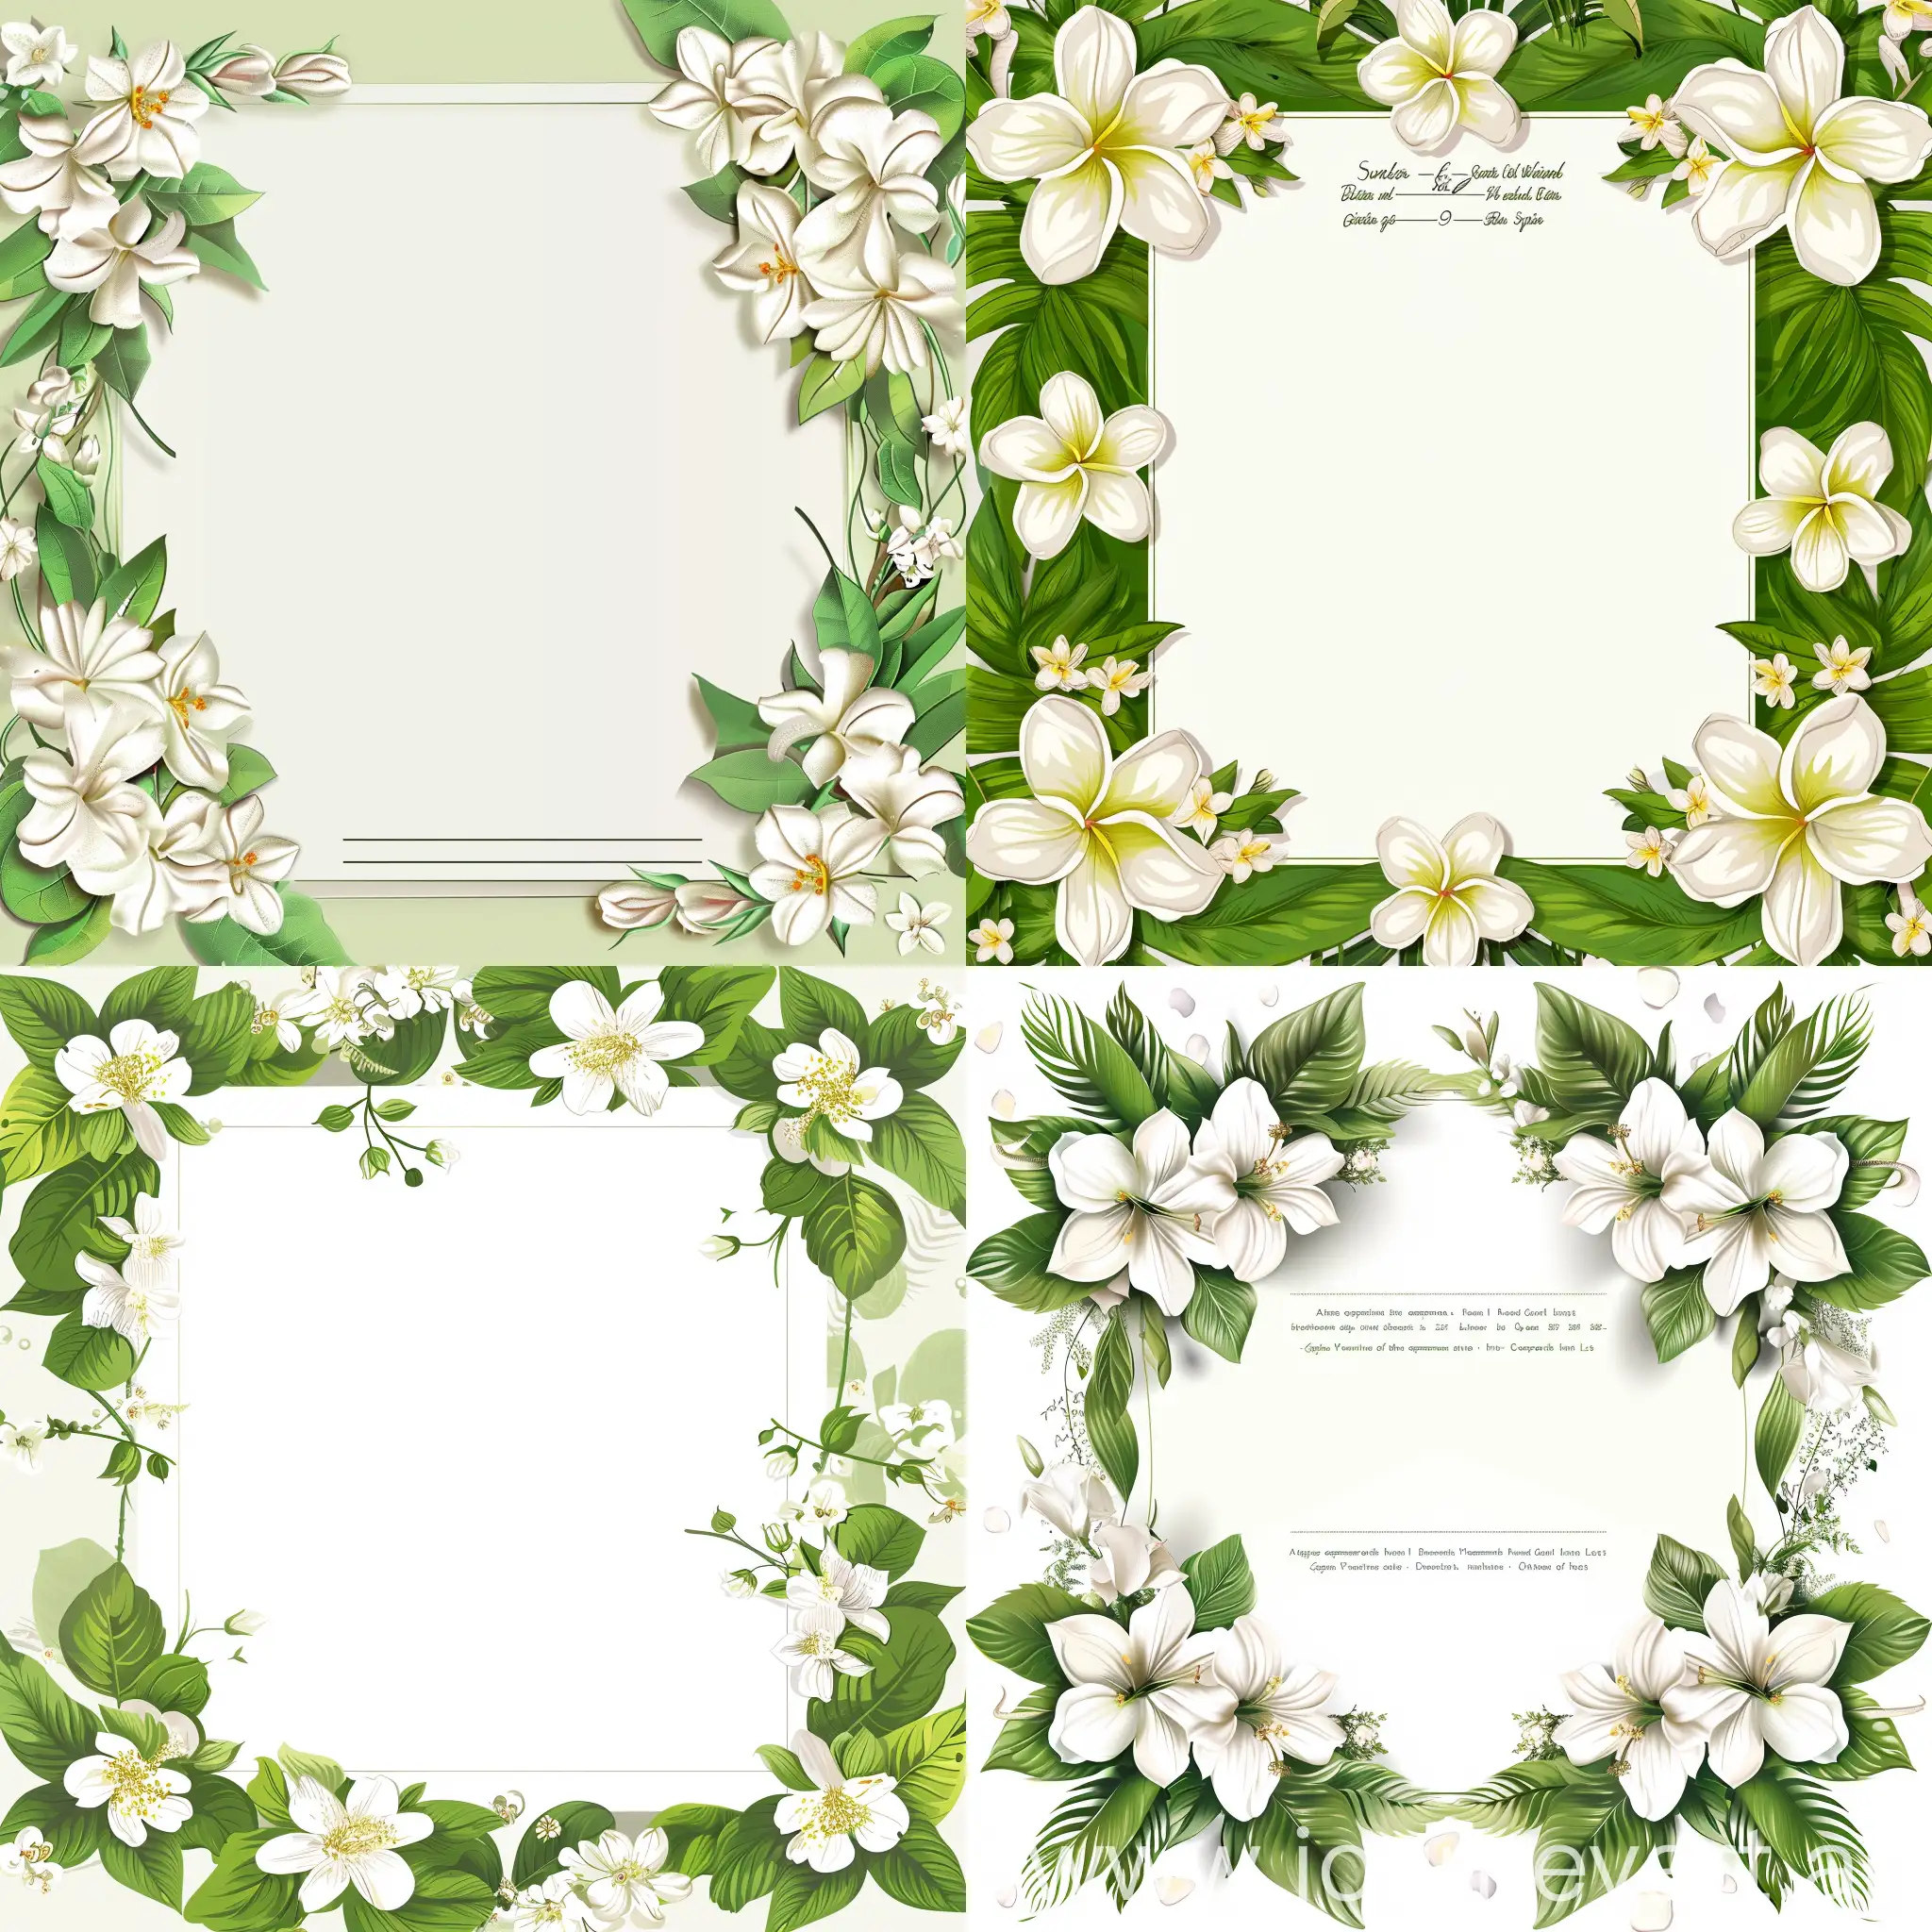 Elegant-Wedding-Card-Design-with-White-and-Green-Floral-Accents